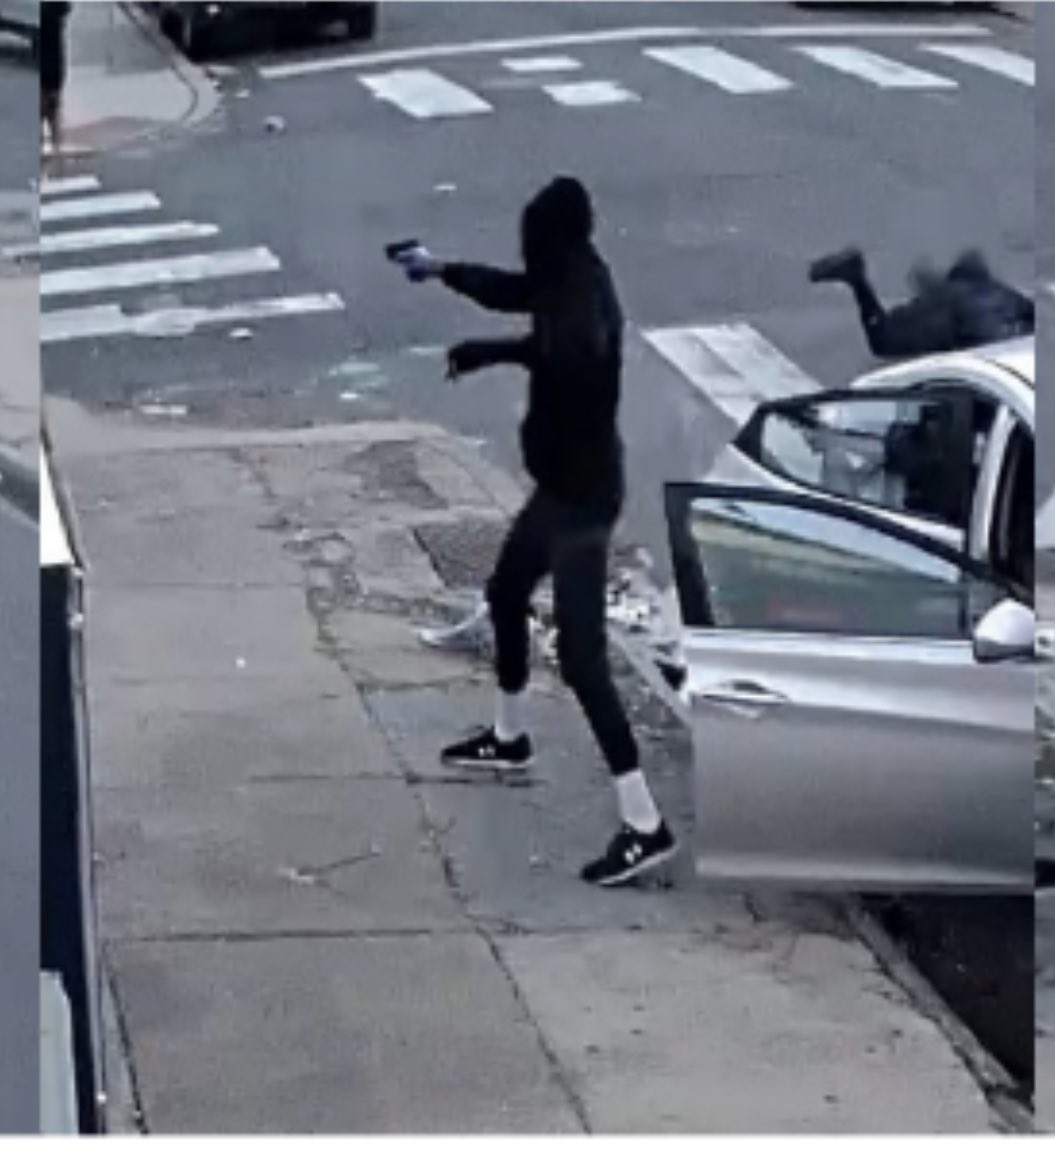 Philly police just released pics of the 3 shooters who fired on a group outside the Blaine school. 7 people hit, inc. a 2-year-old girl + 5 teens. The shots started as the after school program ended, sending the victims running back into the schoolyard for cover